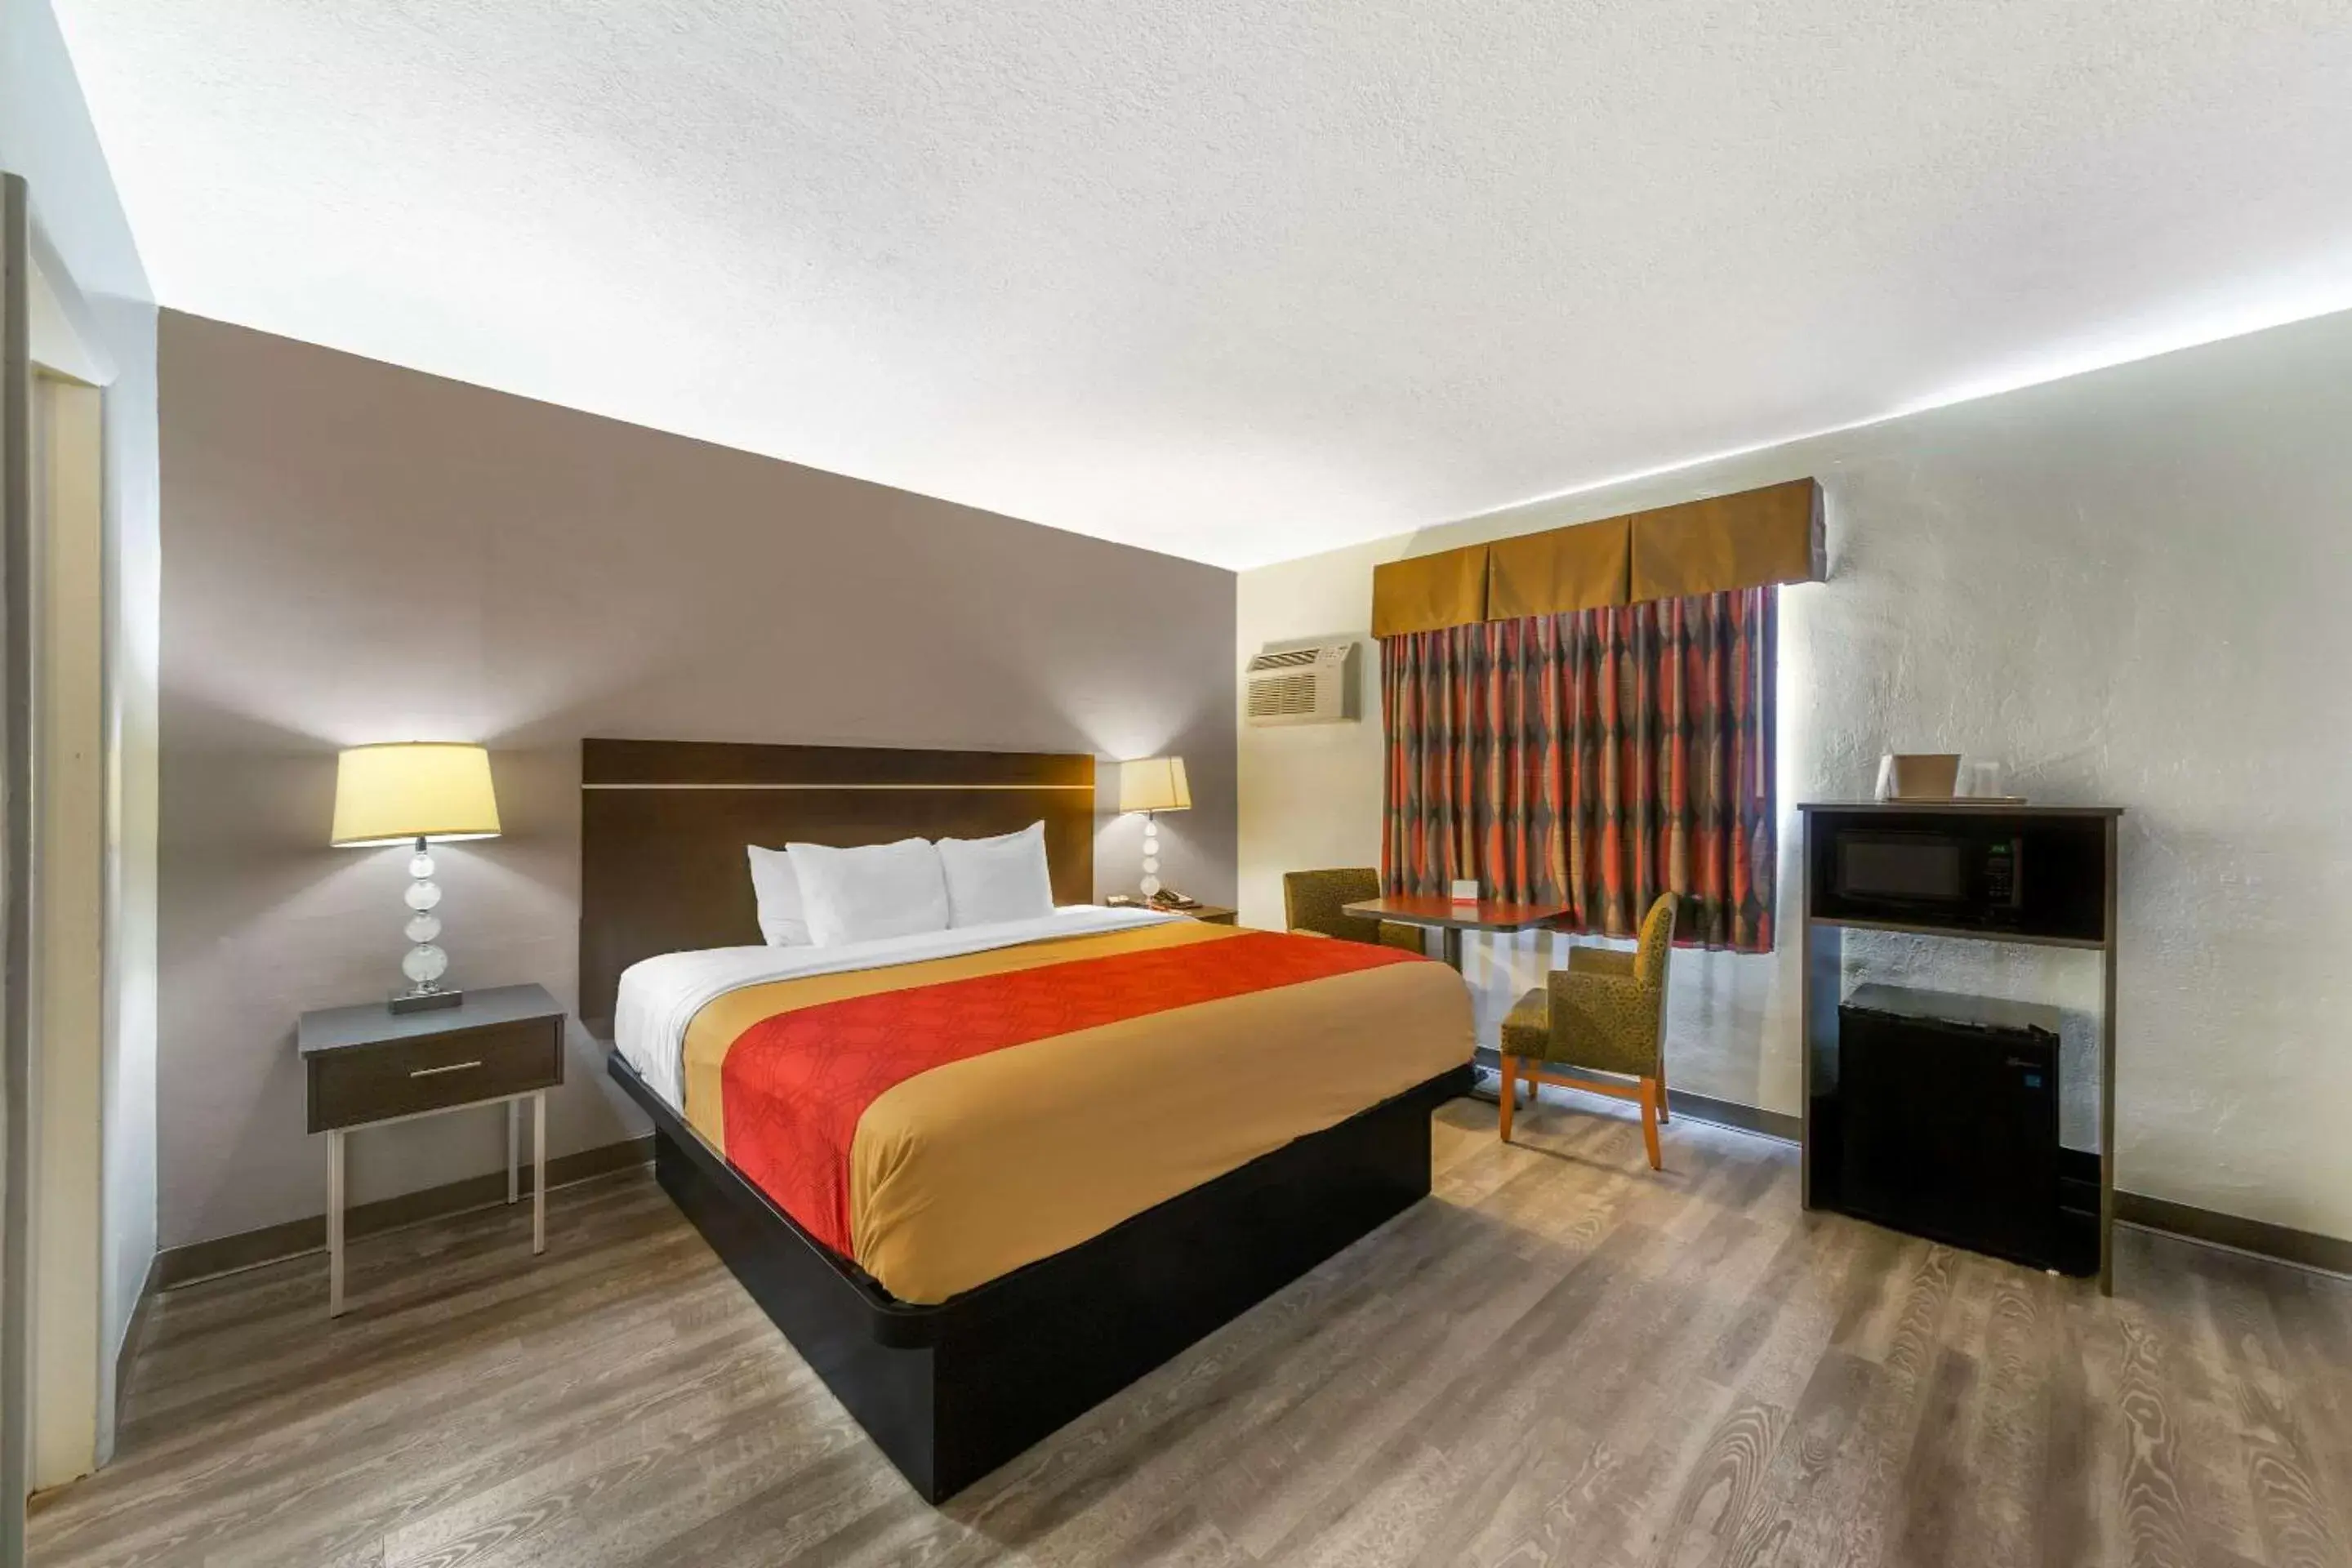 Bedroom in Econo Lodge Hollywood-Ft Lauderdale International Airport